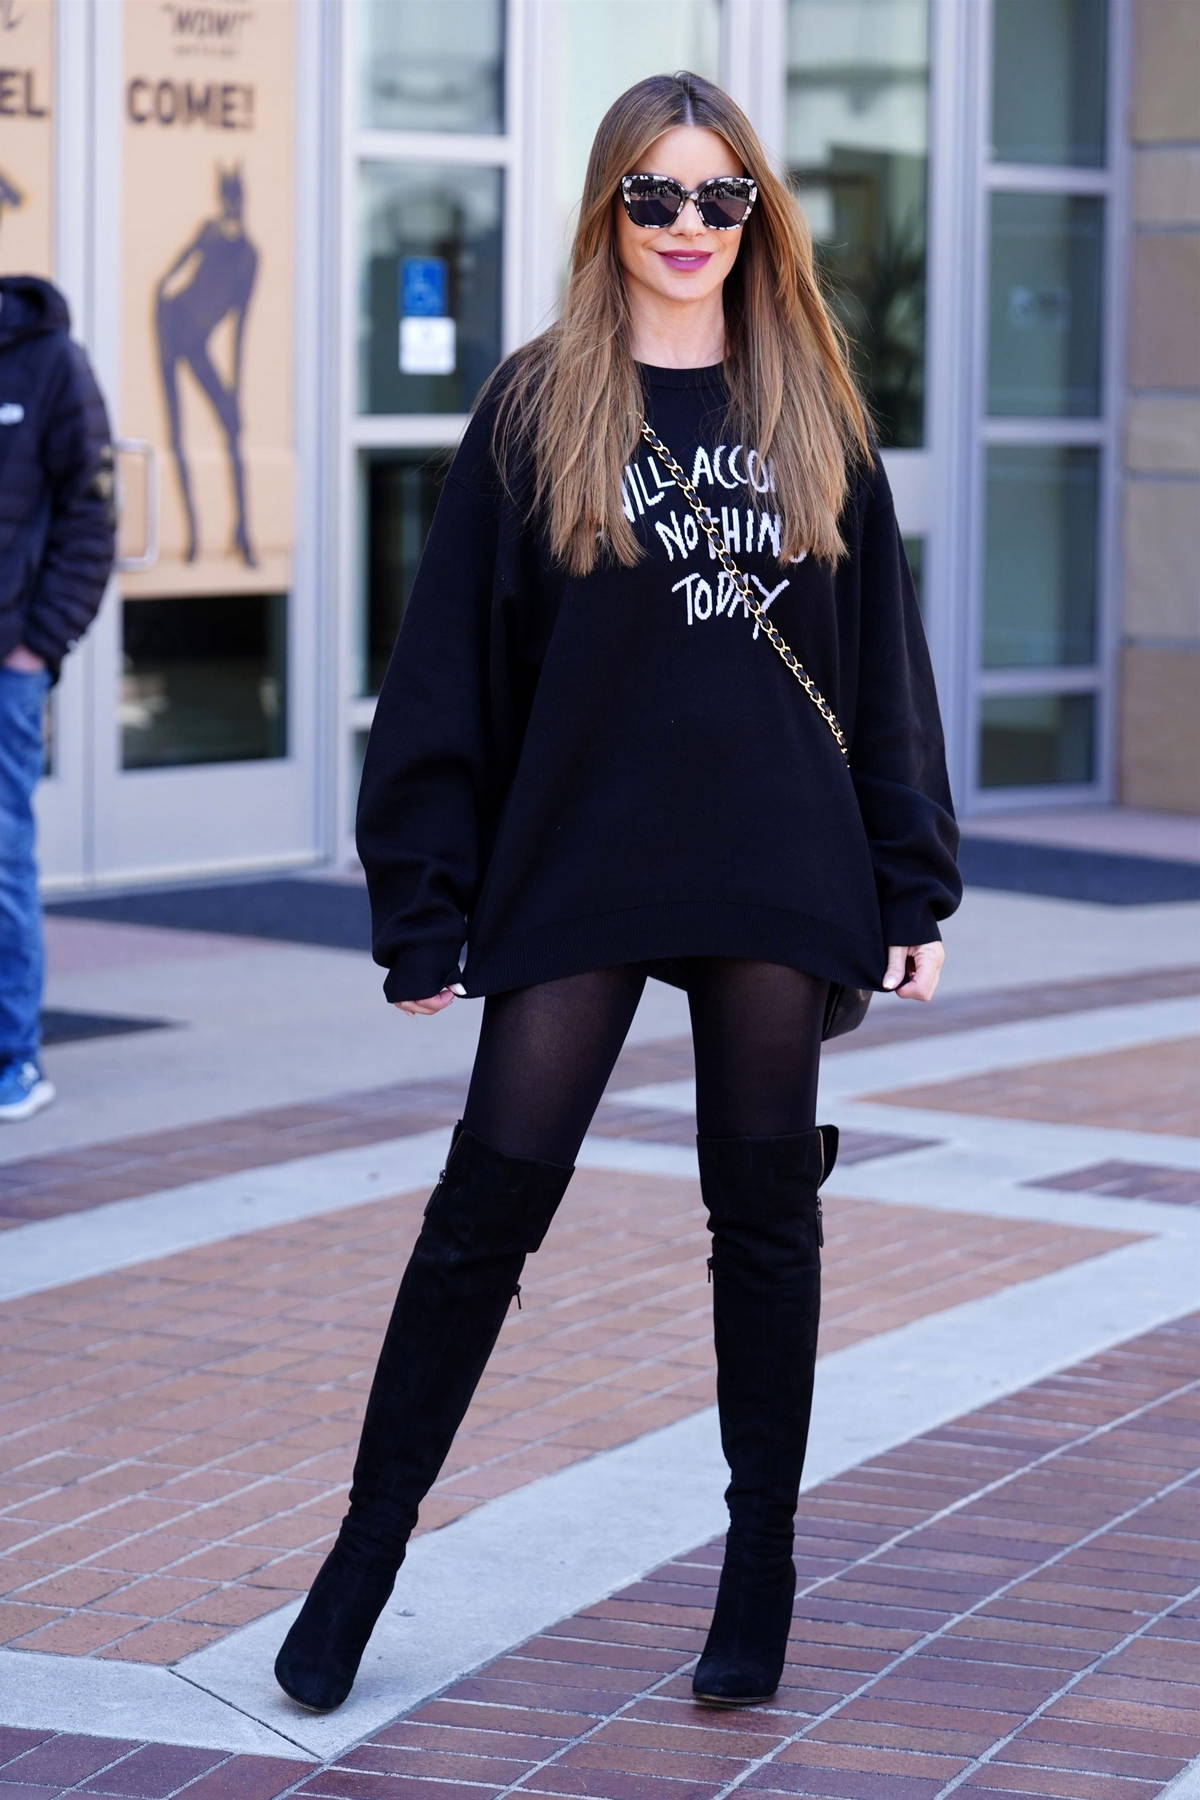 https://www.celebsfirst.com/wp-content/uploads/2023/04/sofia-vergara-rocks-an-oversized-black-sweater-with-matching-tights-and-boots-as-she-arrives-at-agt-studios-in-pasadena-california-060423_8.jpg